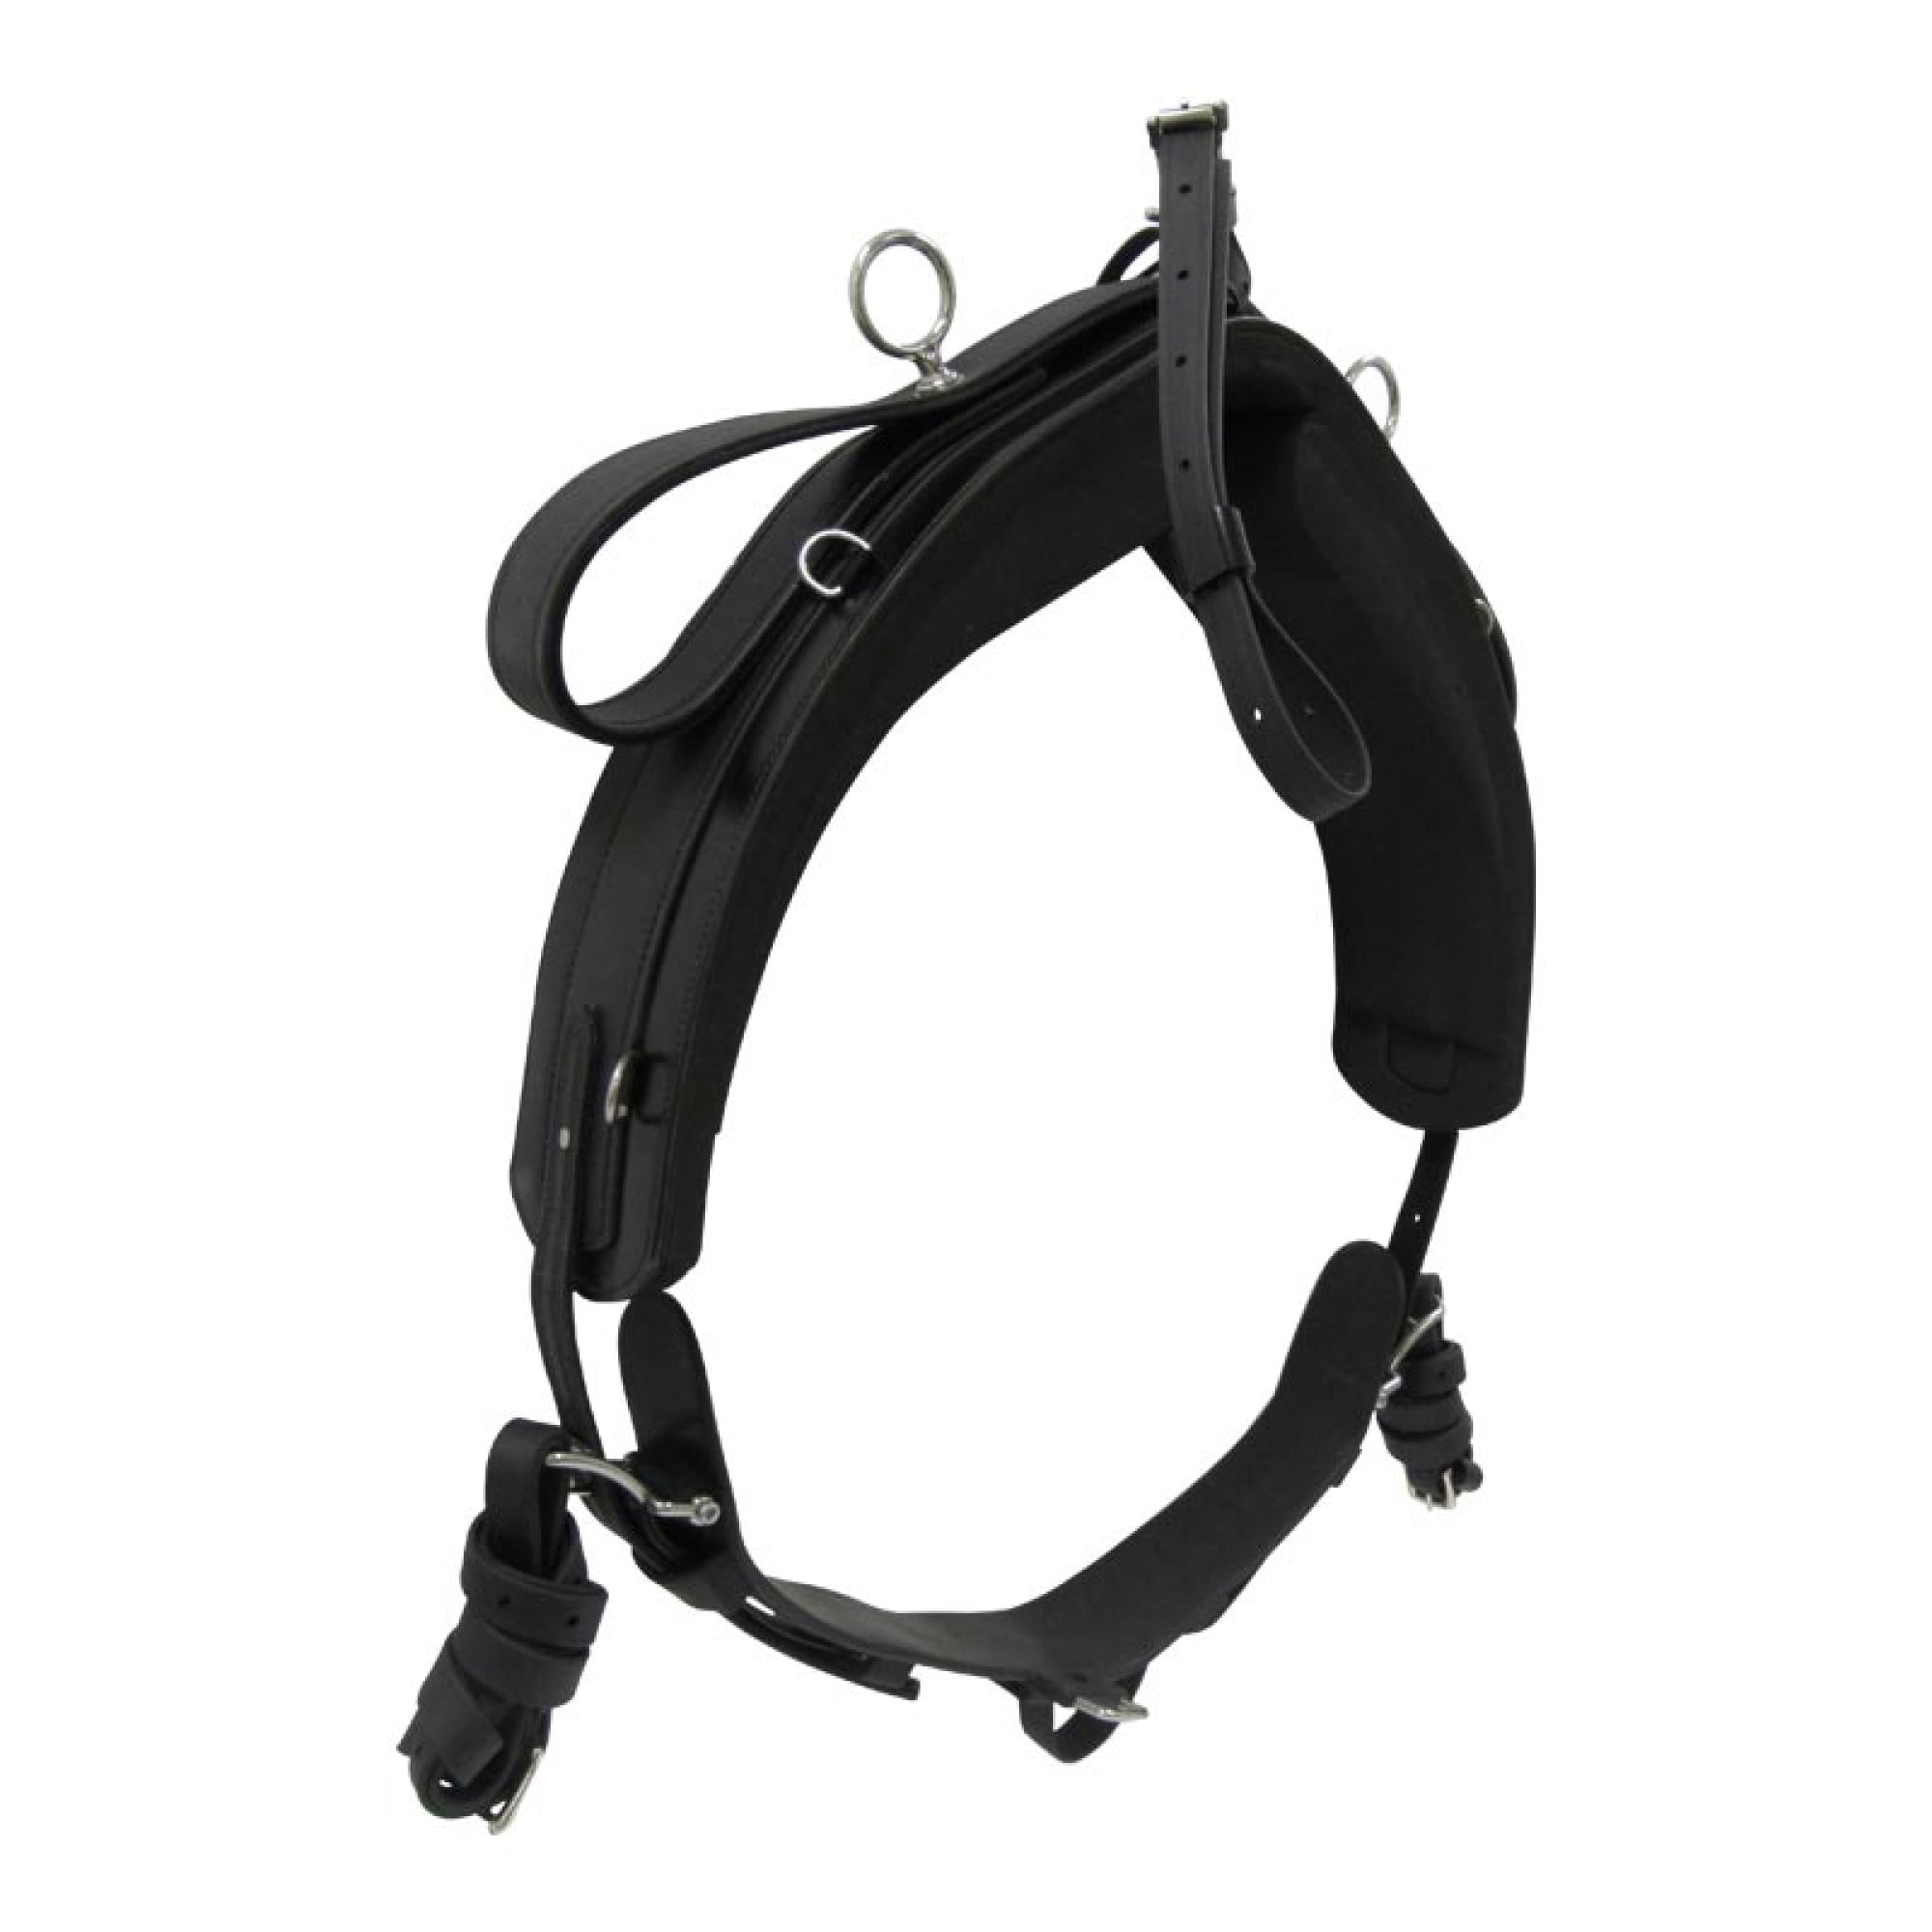 Tradition TROT Complete harness tradi